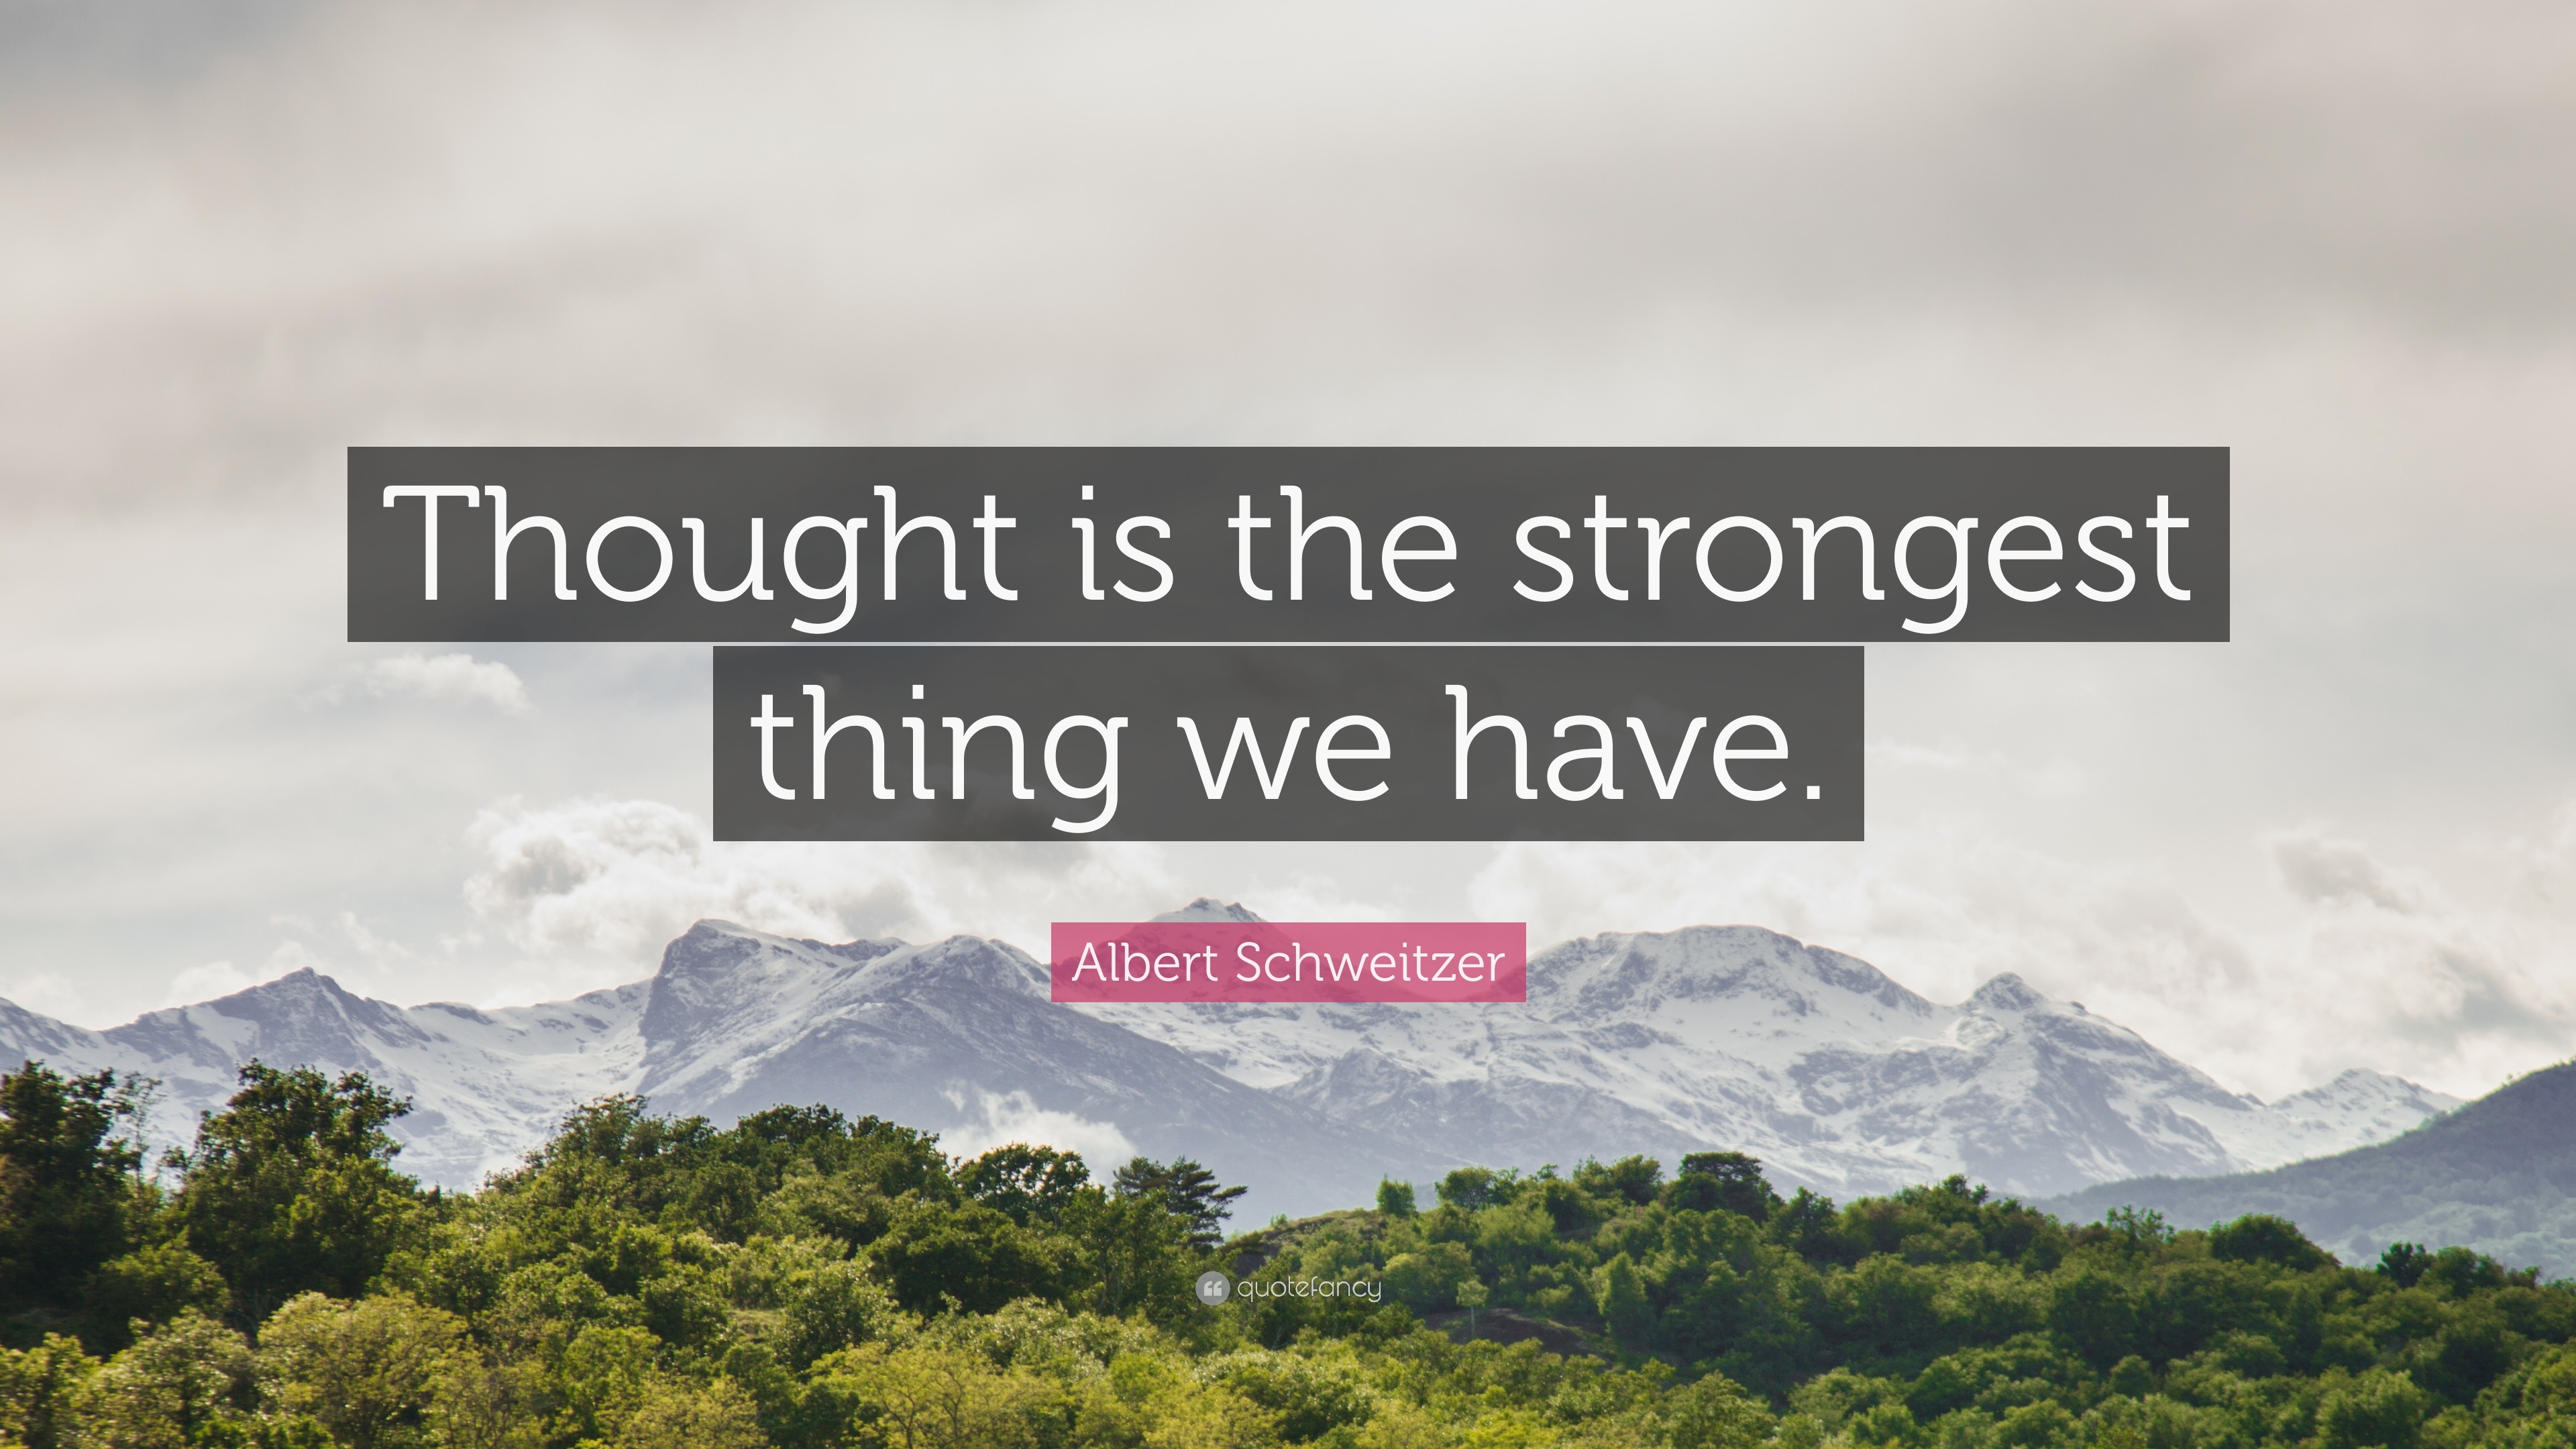 out of my life and thought by albert schweitzer